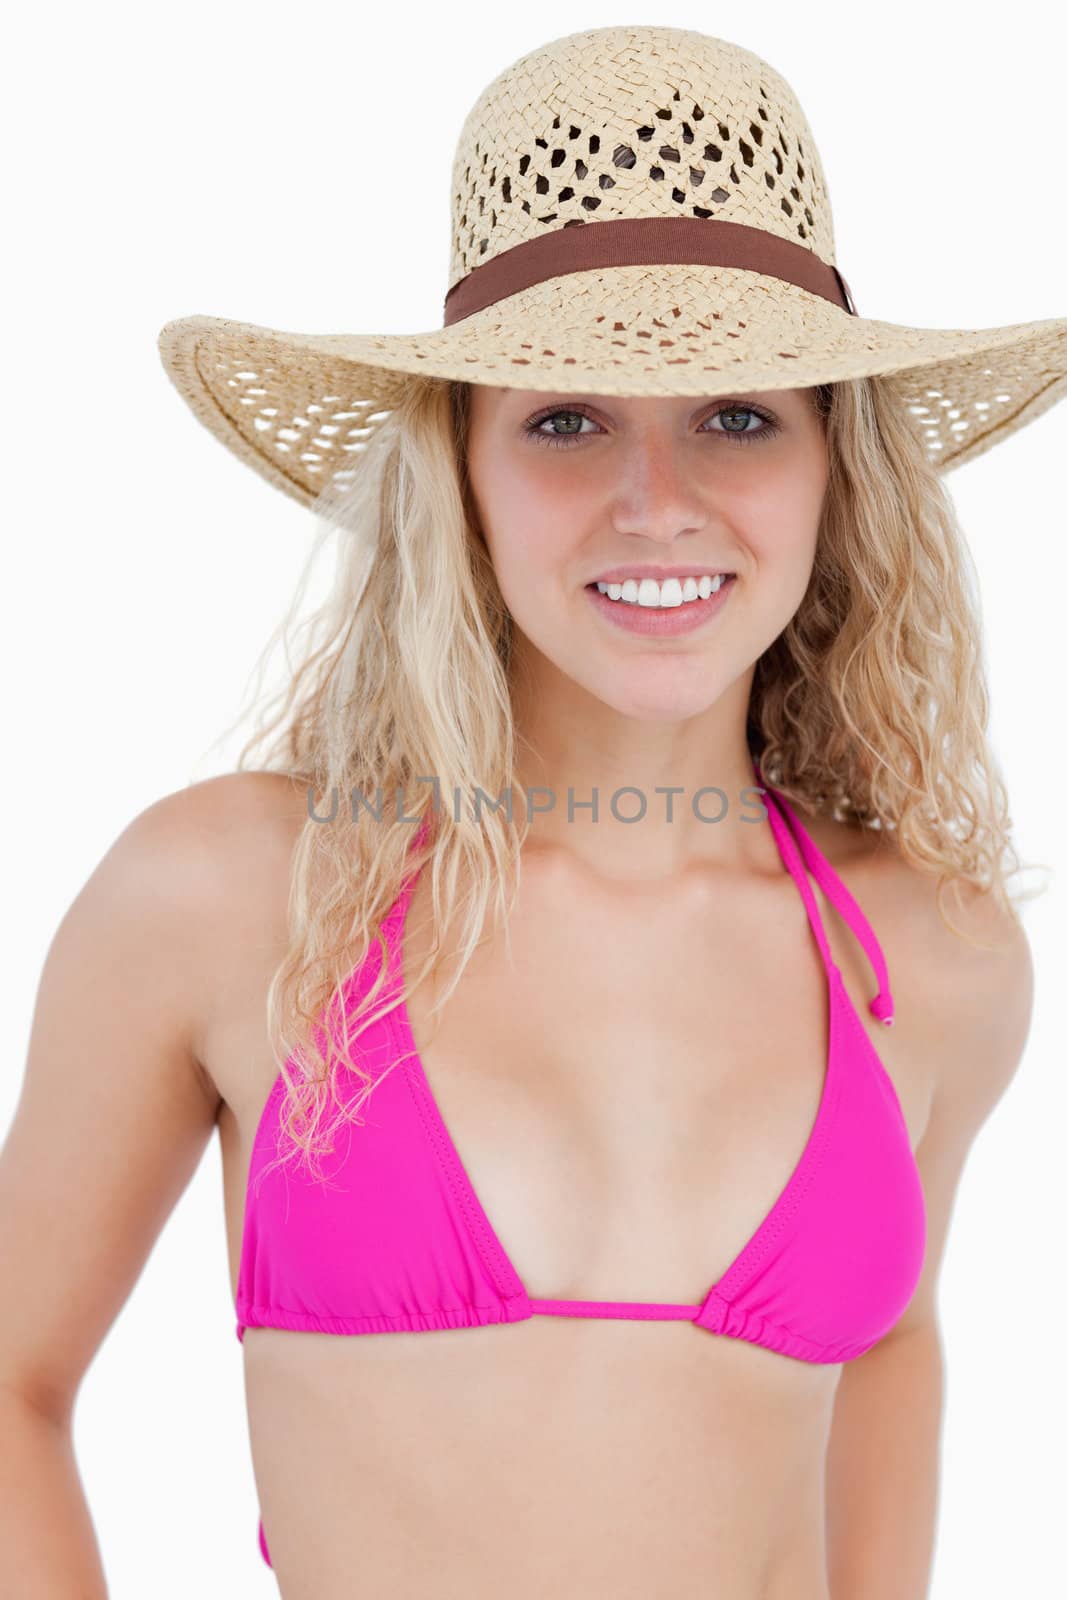 Smiling attractive teenager in beachwear standing upright against a white background